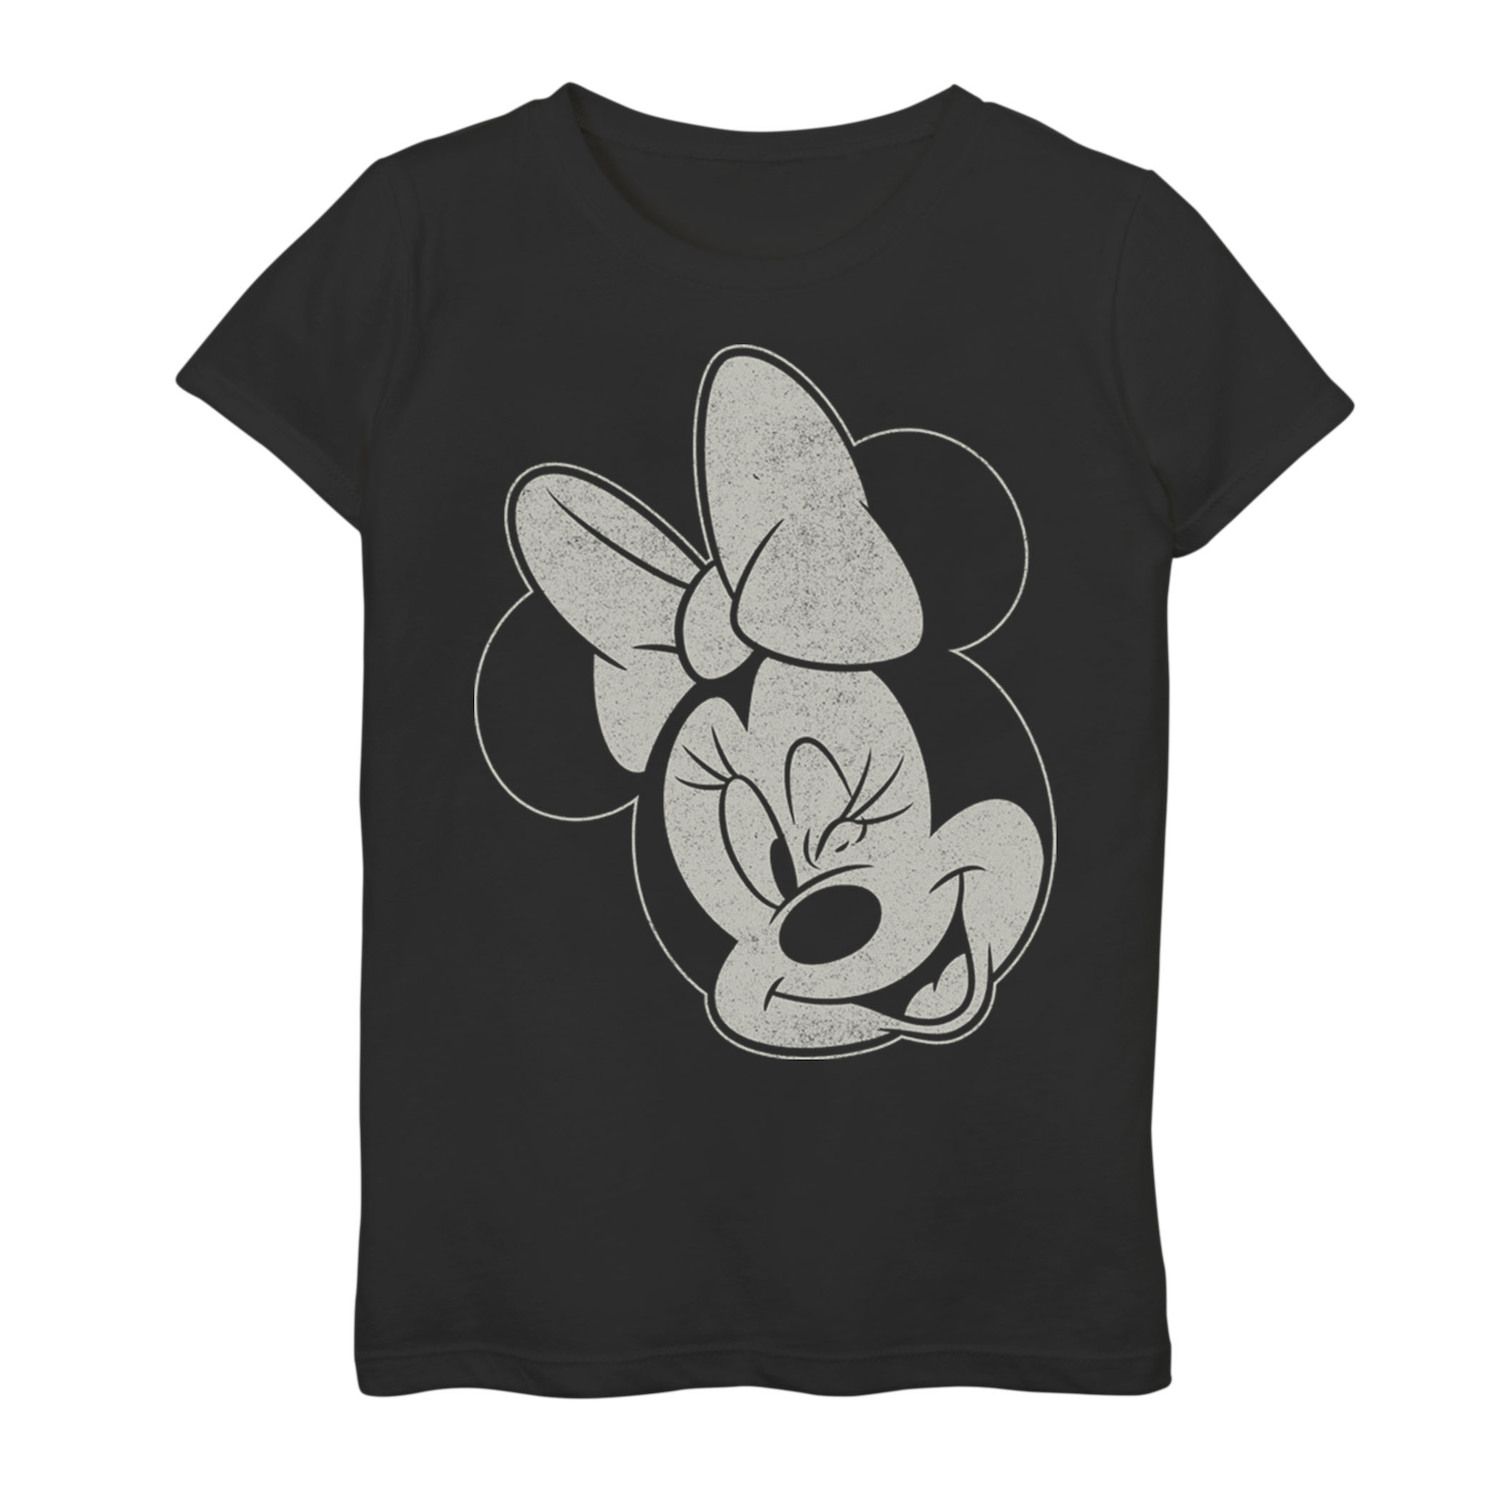 Image for Disney 's Mickey Mouse Girls 7-16 Minnie Winking Graphic Tee at Kohl's.